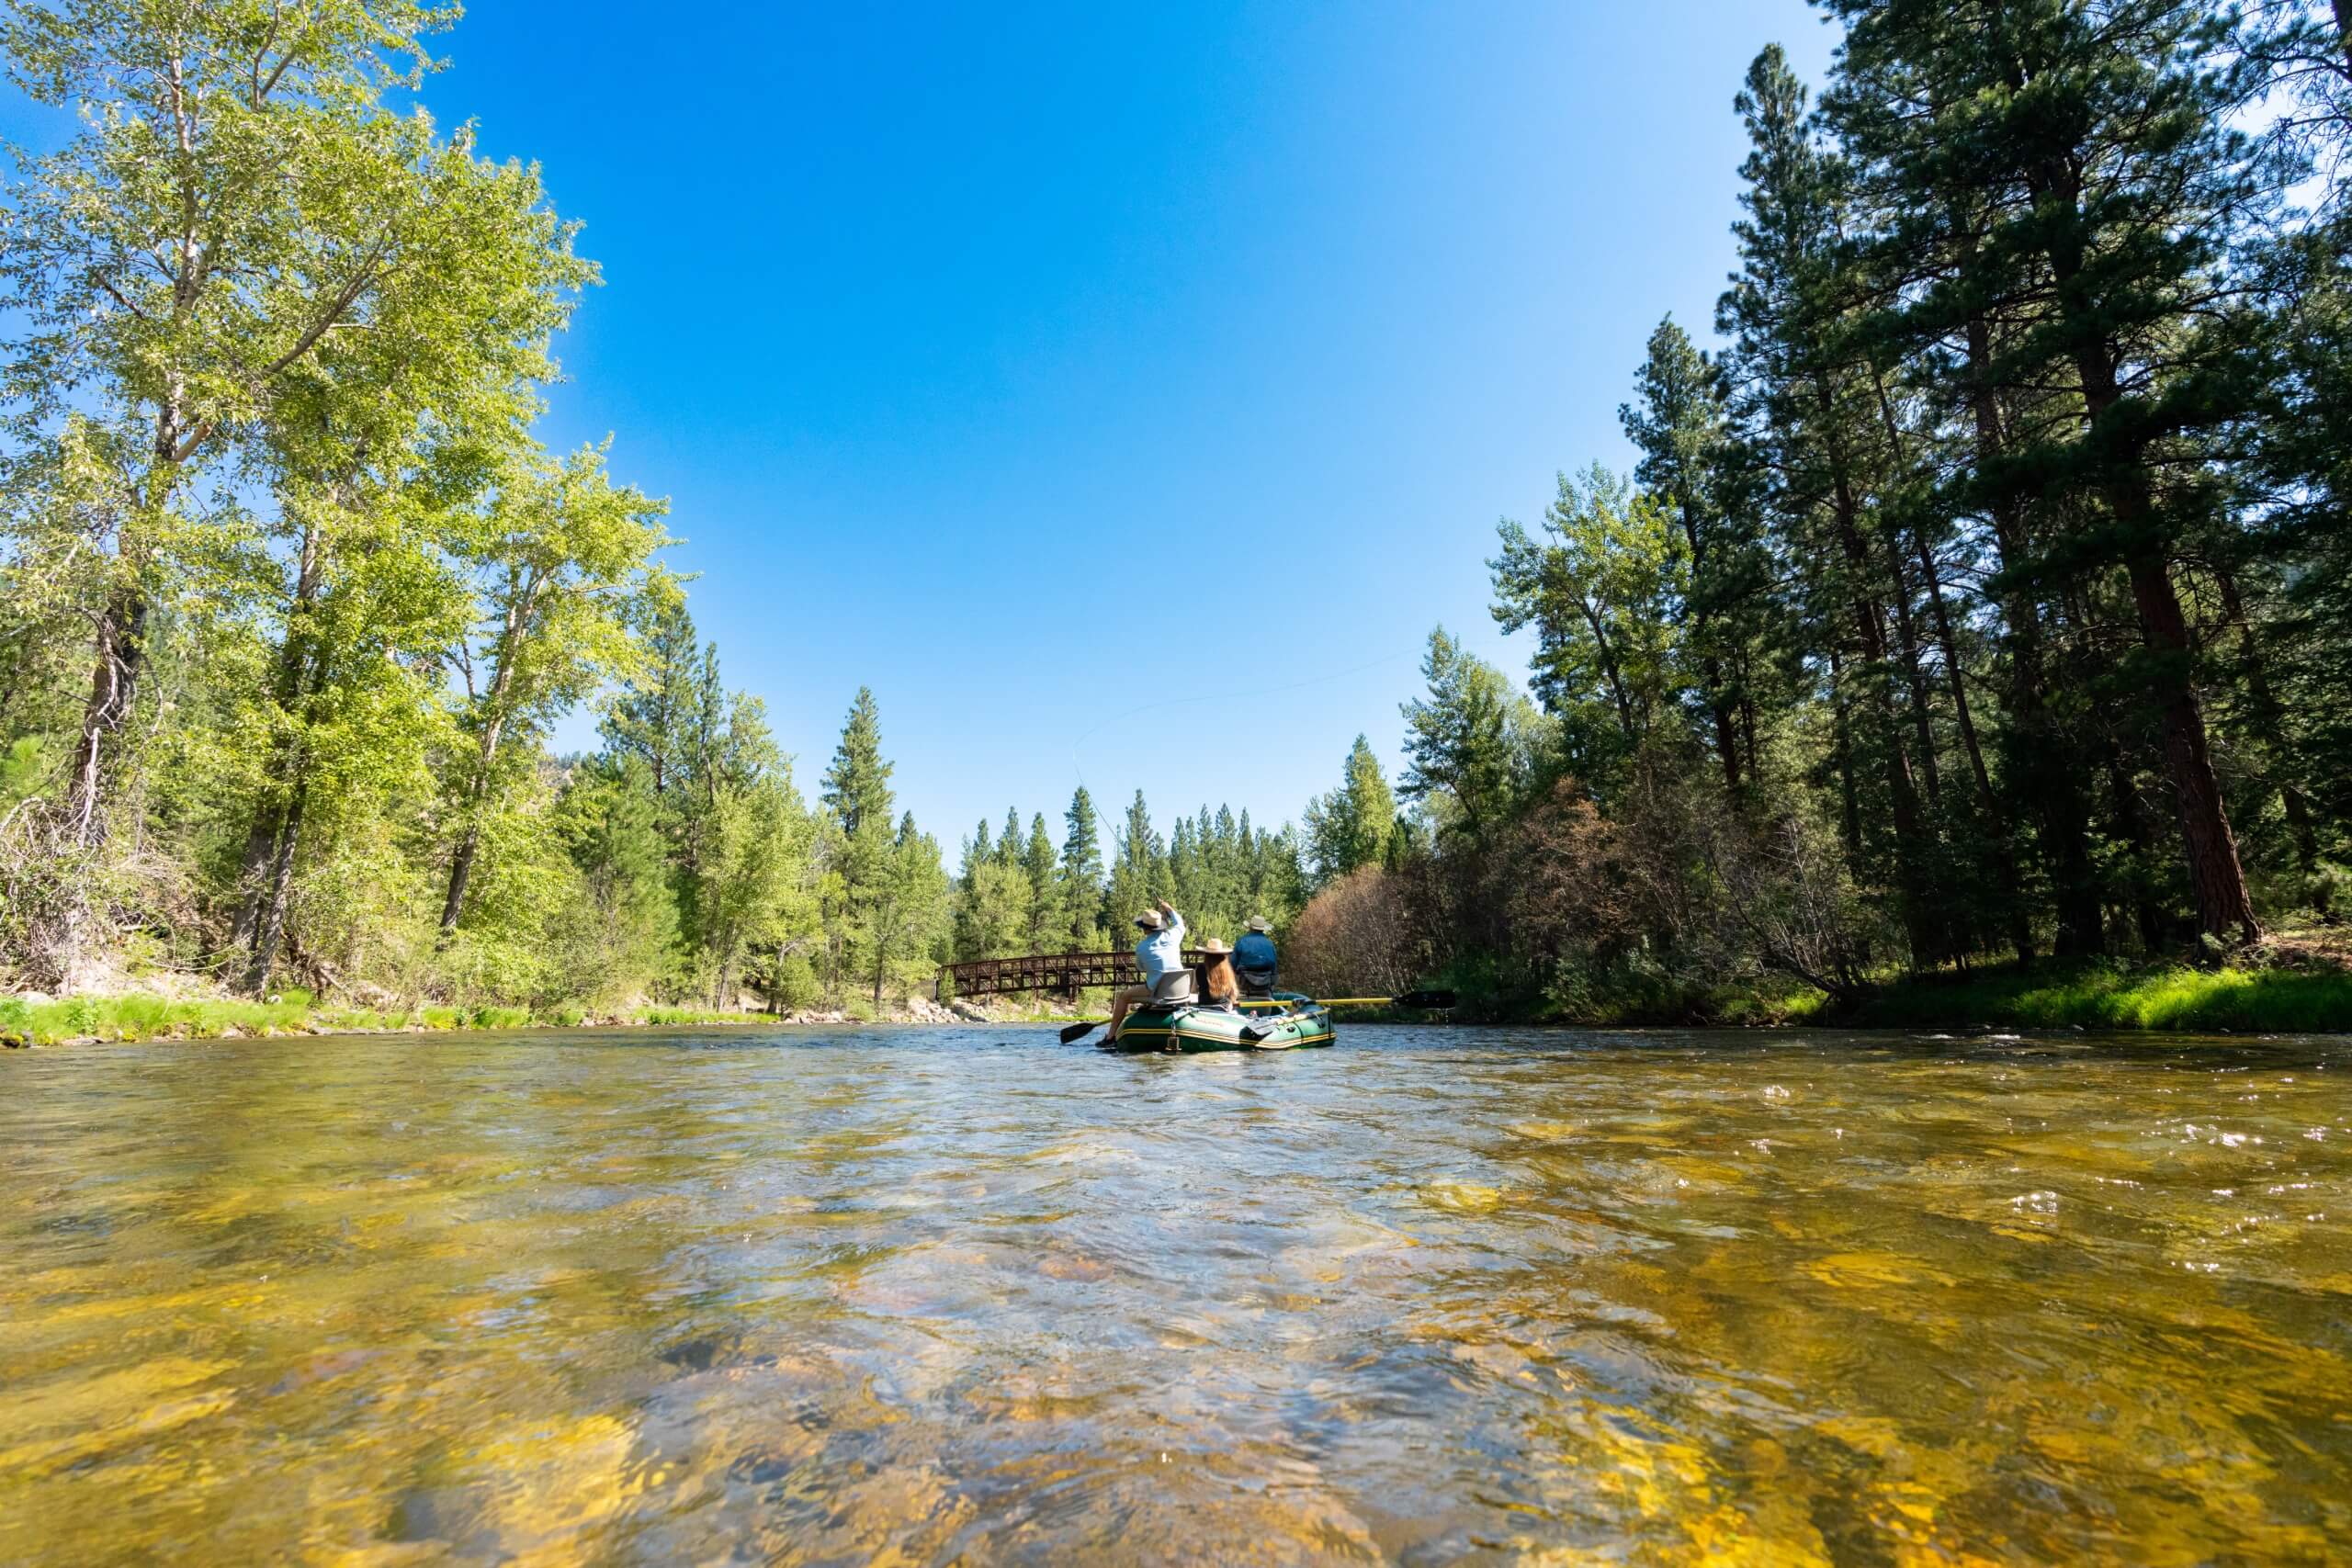 Guests Fly Fishing on the west fork river.